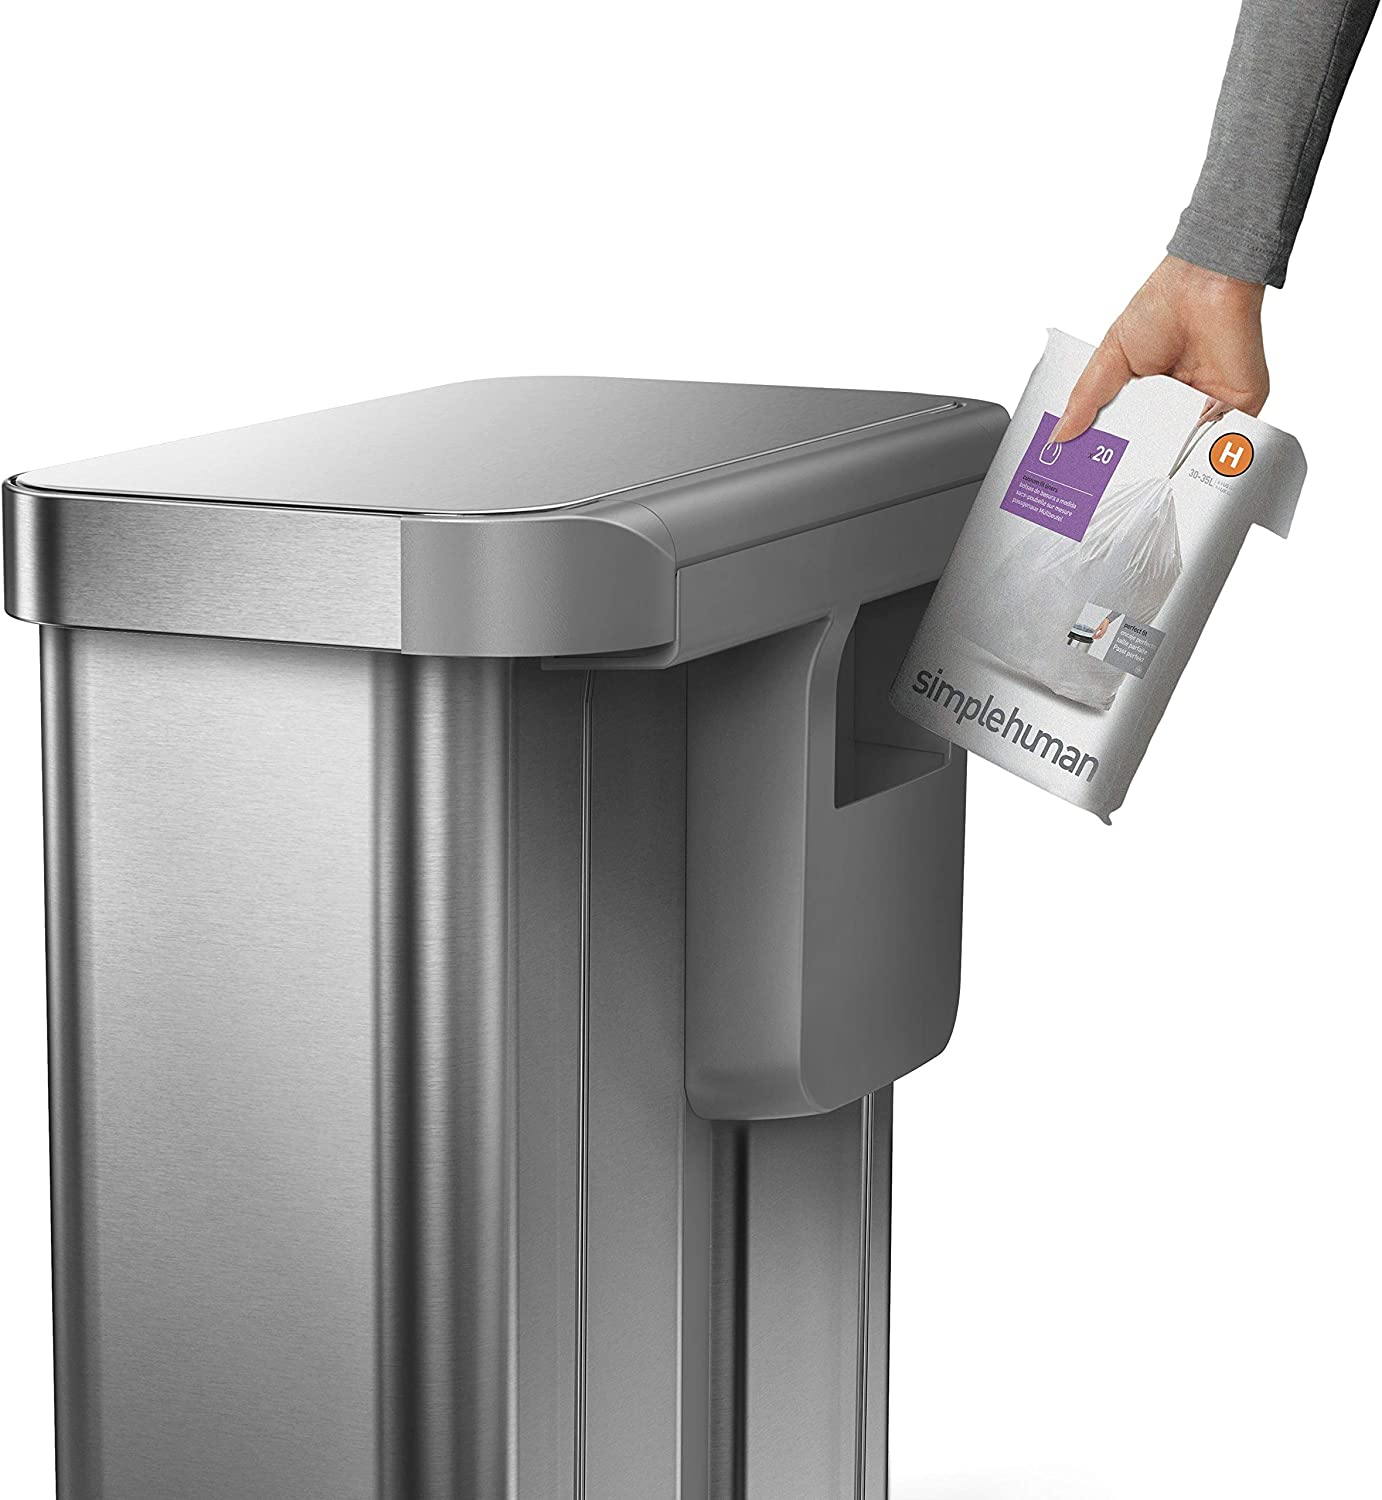 https://bigbigmart.com/wp-content/uploads/2023/05/simplehuman-58-Liter-15.3-Gallon-Rectangular-Hands-Free-Dual-Compartment-Recycling-Kitchen-Step-Trash-Can-with-Soft-Close-Lid-Brushed-Stainless-Steel6.jpg